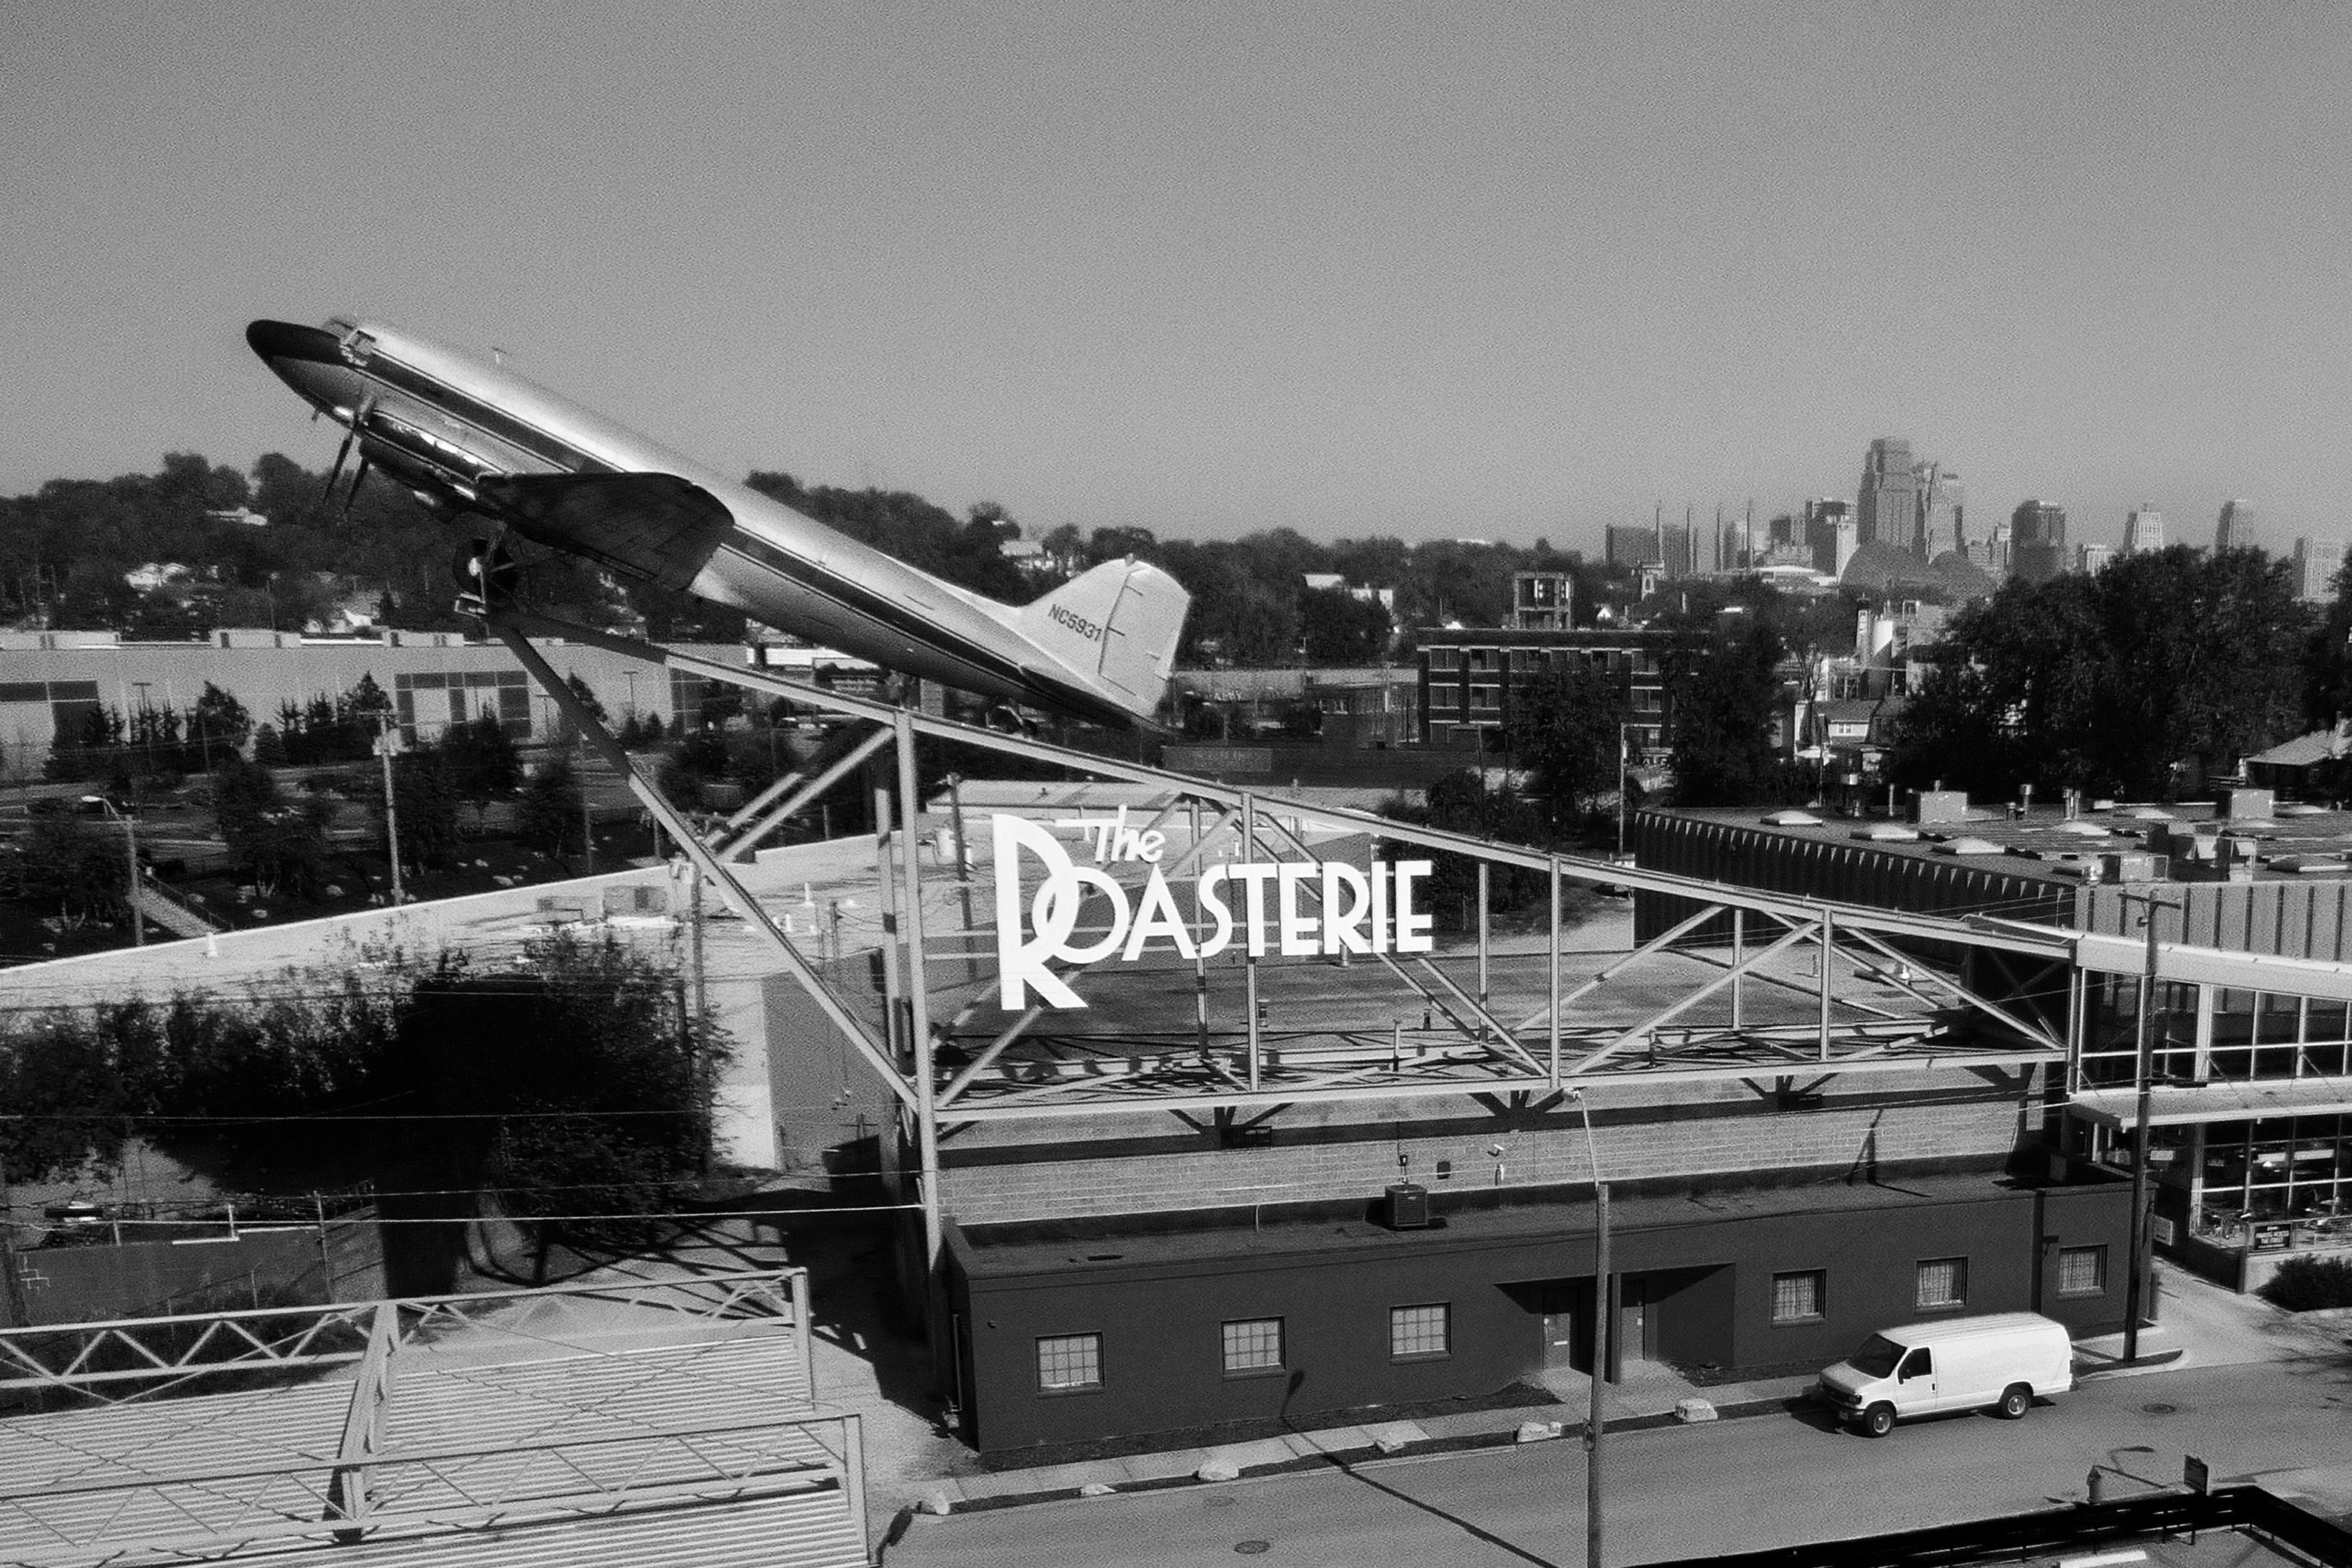 A photo of The Roasterie Coffee Factory with a Douglas DC-3 on top of it.